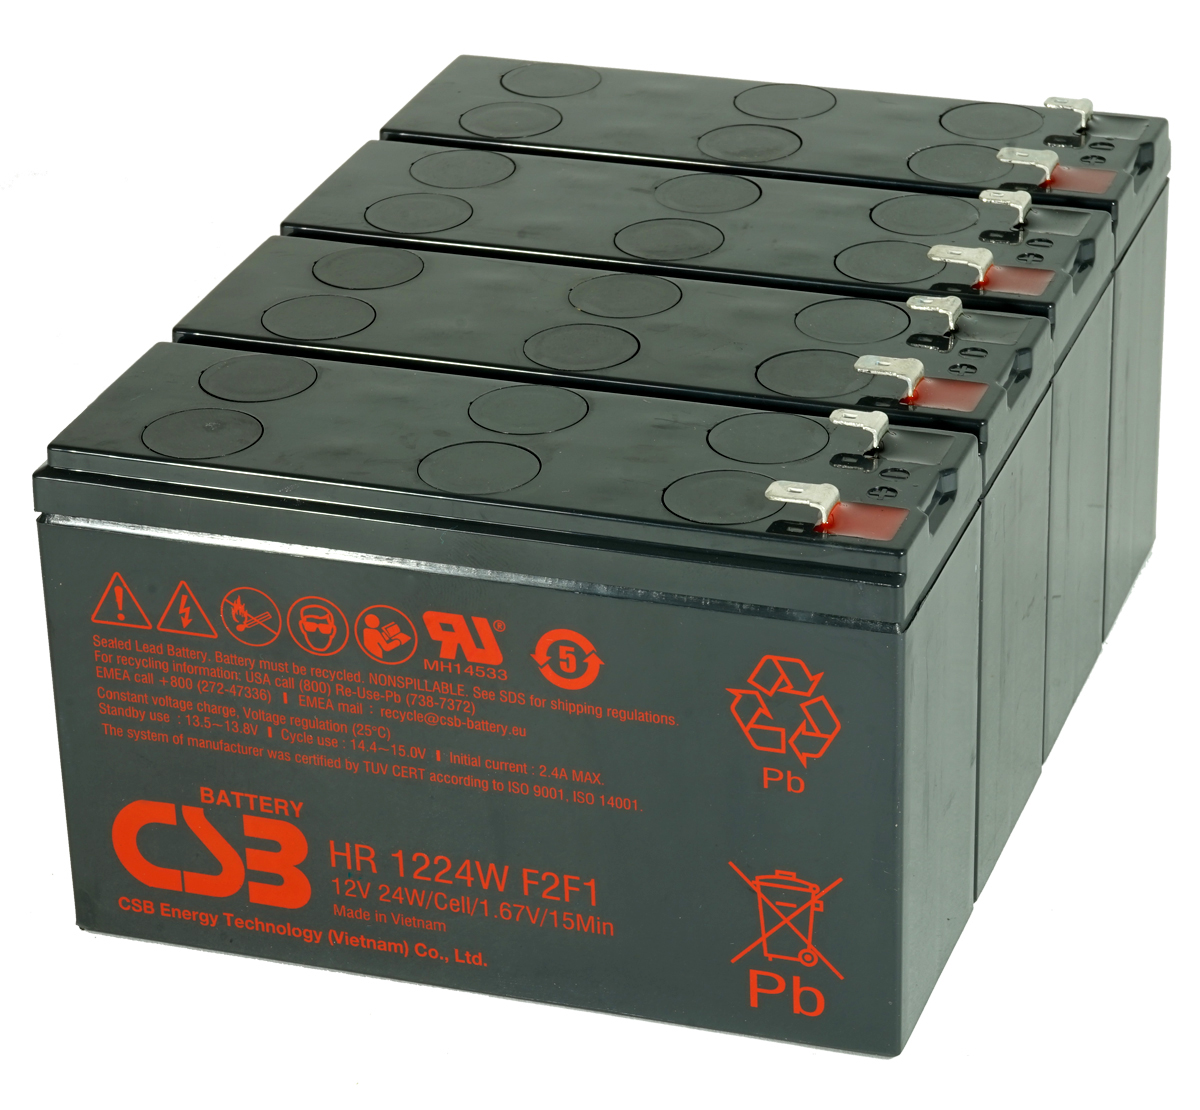 MDS1015 UPS Battery Kit for MGE AB1015